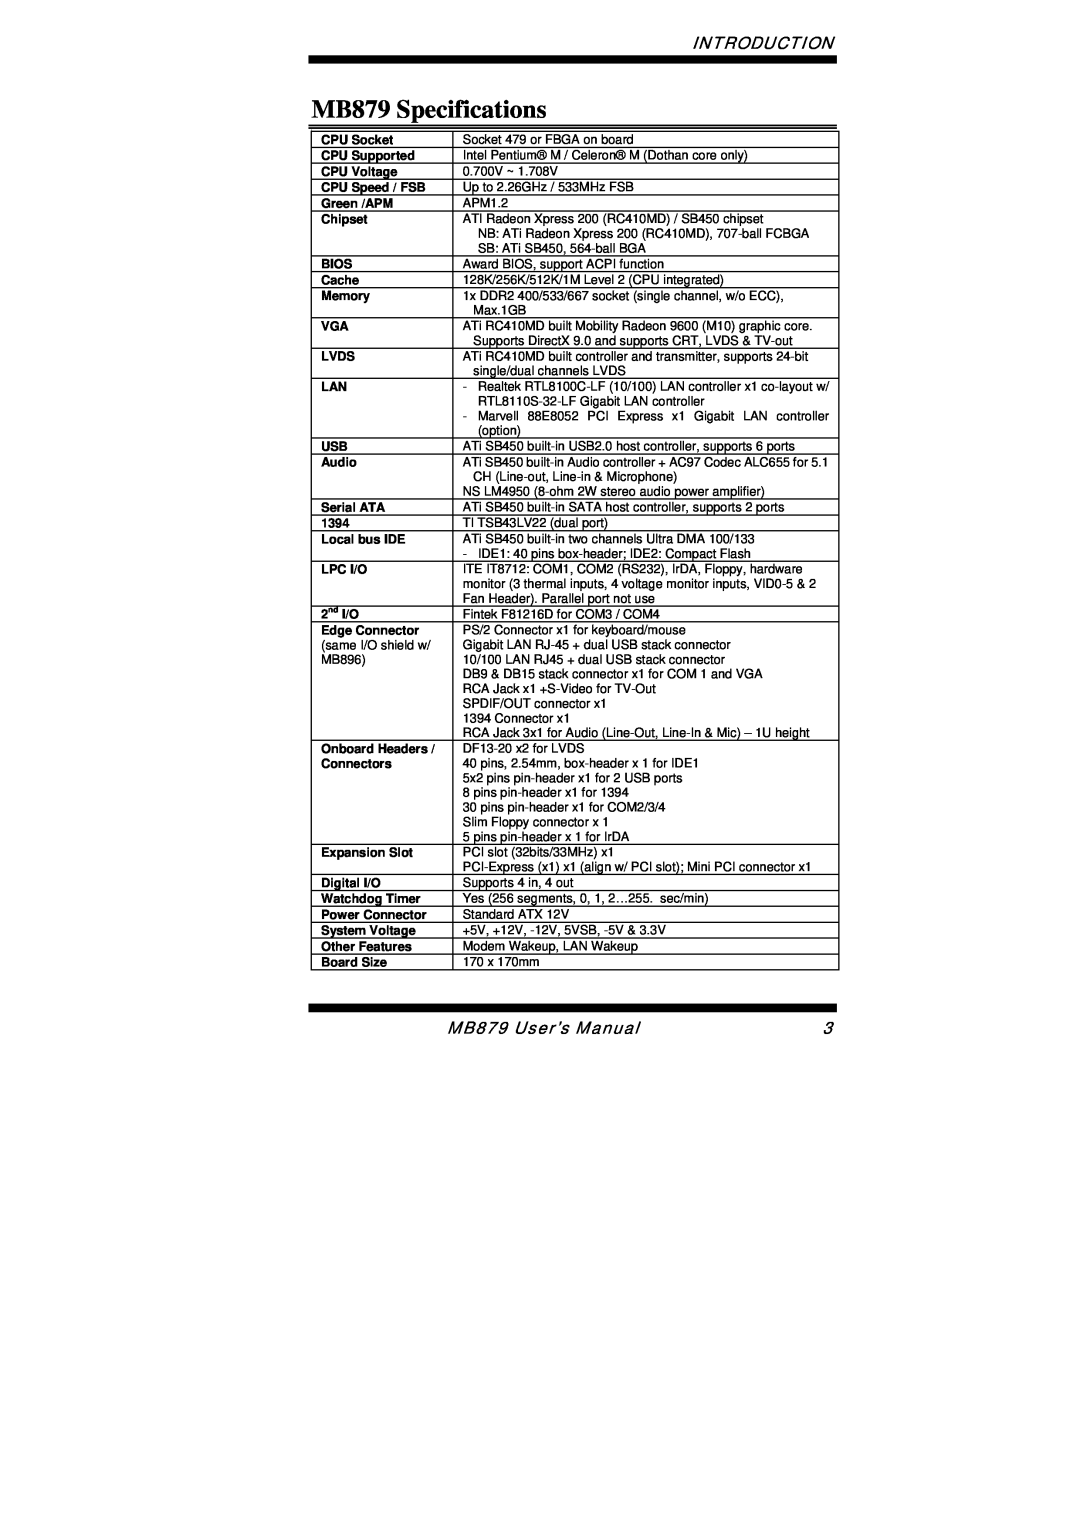 Intel user manual MB879 Specifications, Introduction, MB879 User’s Manual 